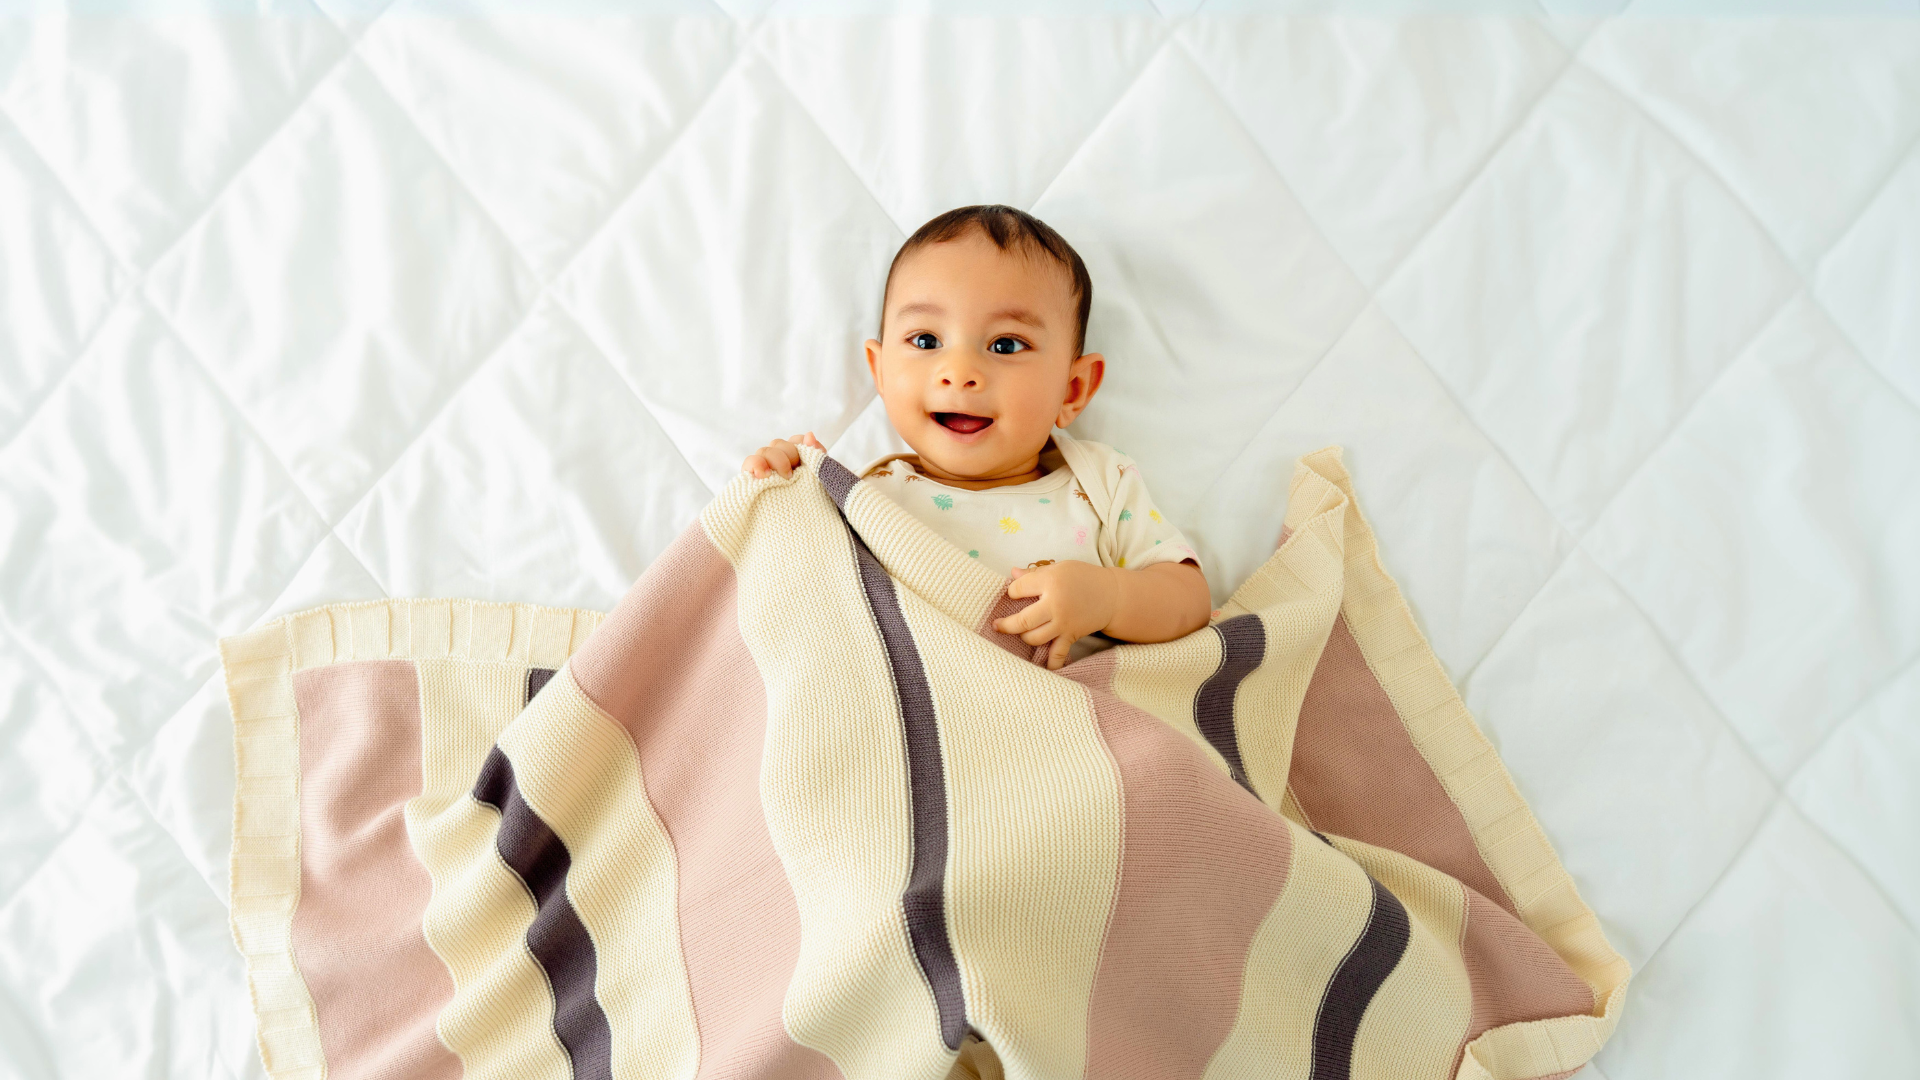 Why Greendigo's Blankets Are the Blankets to Bundle Up With!